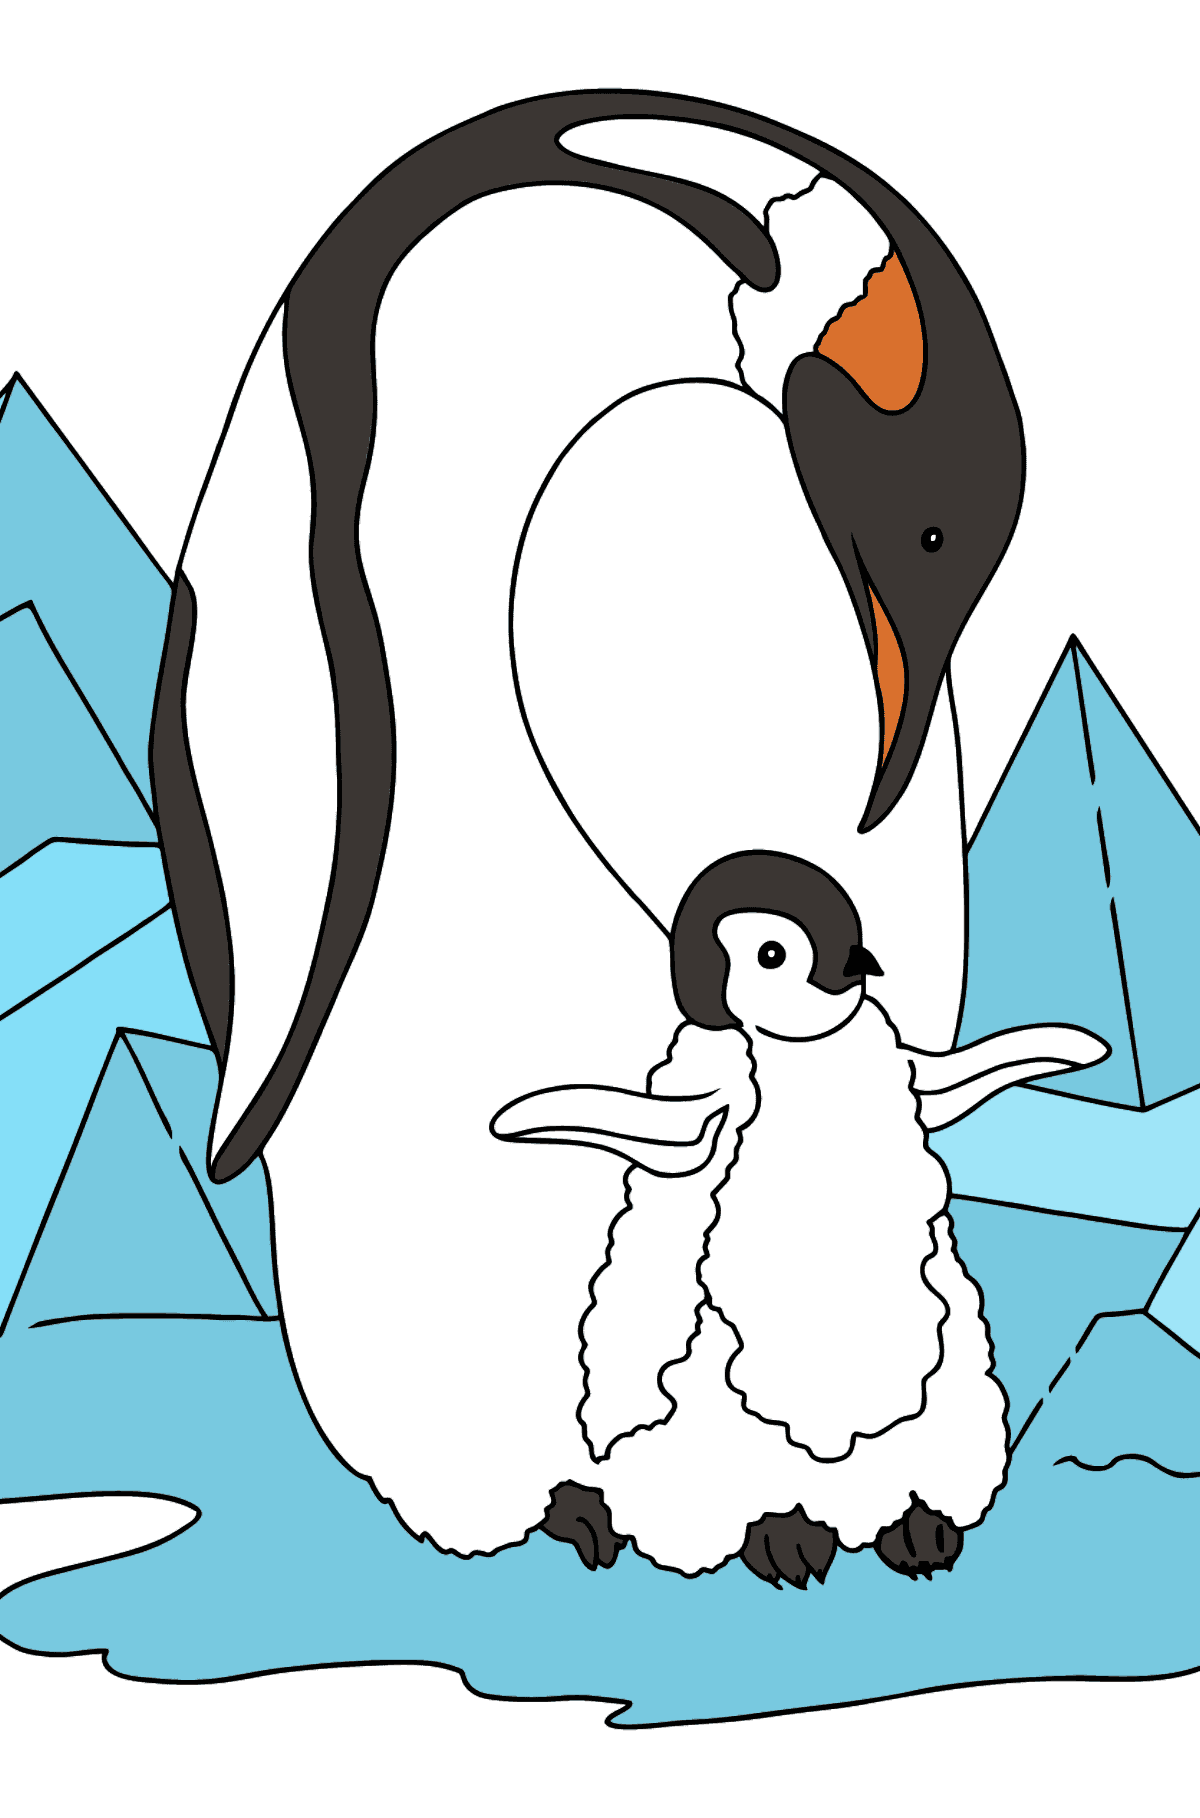 Coloring Page - A Penguin with a Baby - Coloring Pages for Kids